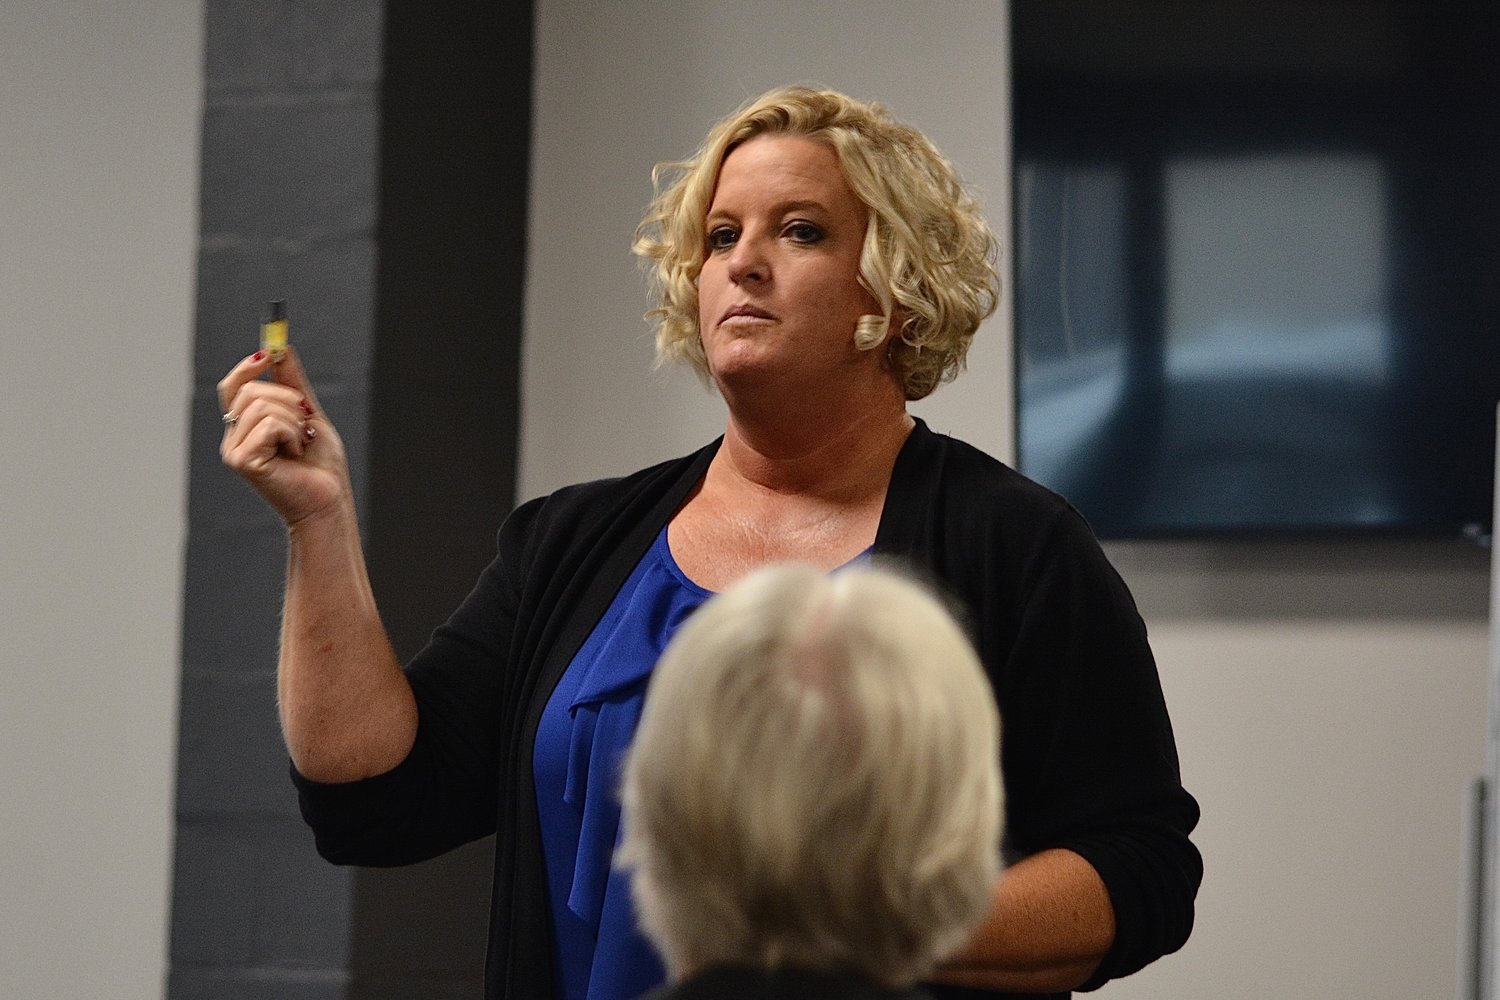 Humansville superintendent Tammy Erwin holds up the cartridge of one of the vapes confiscated from students in her school district.